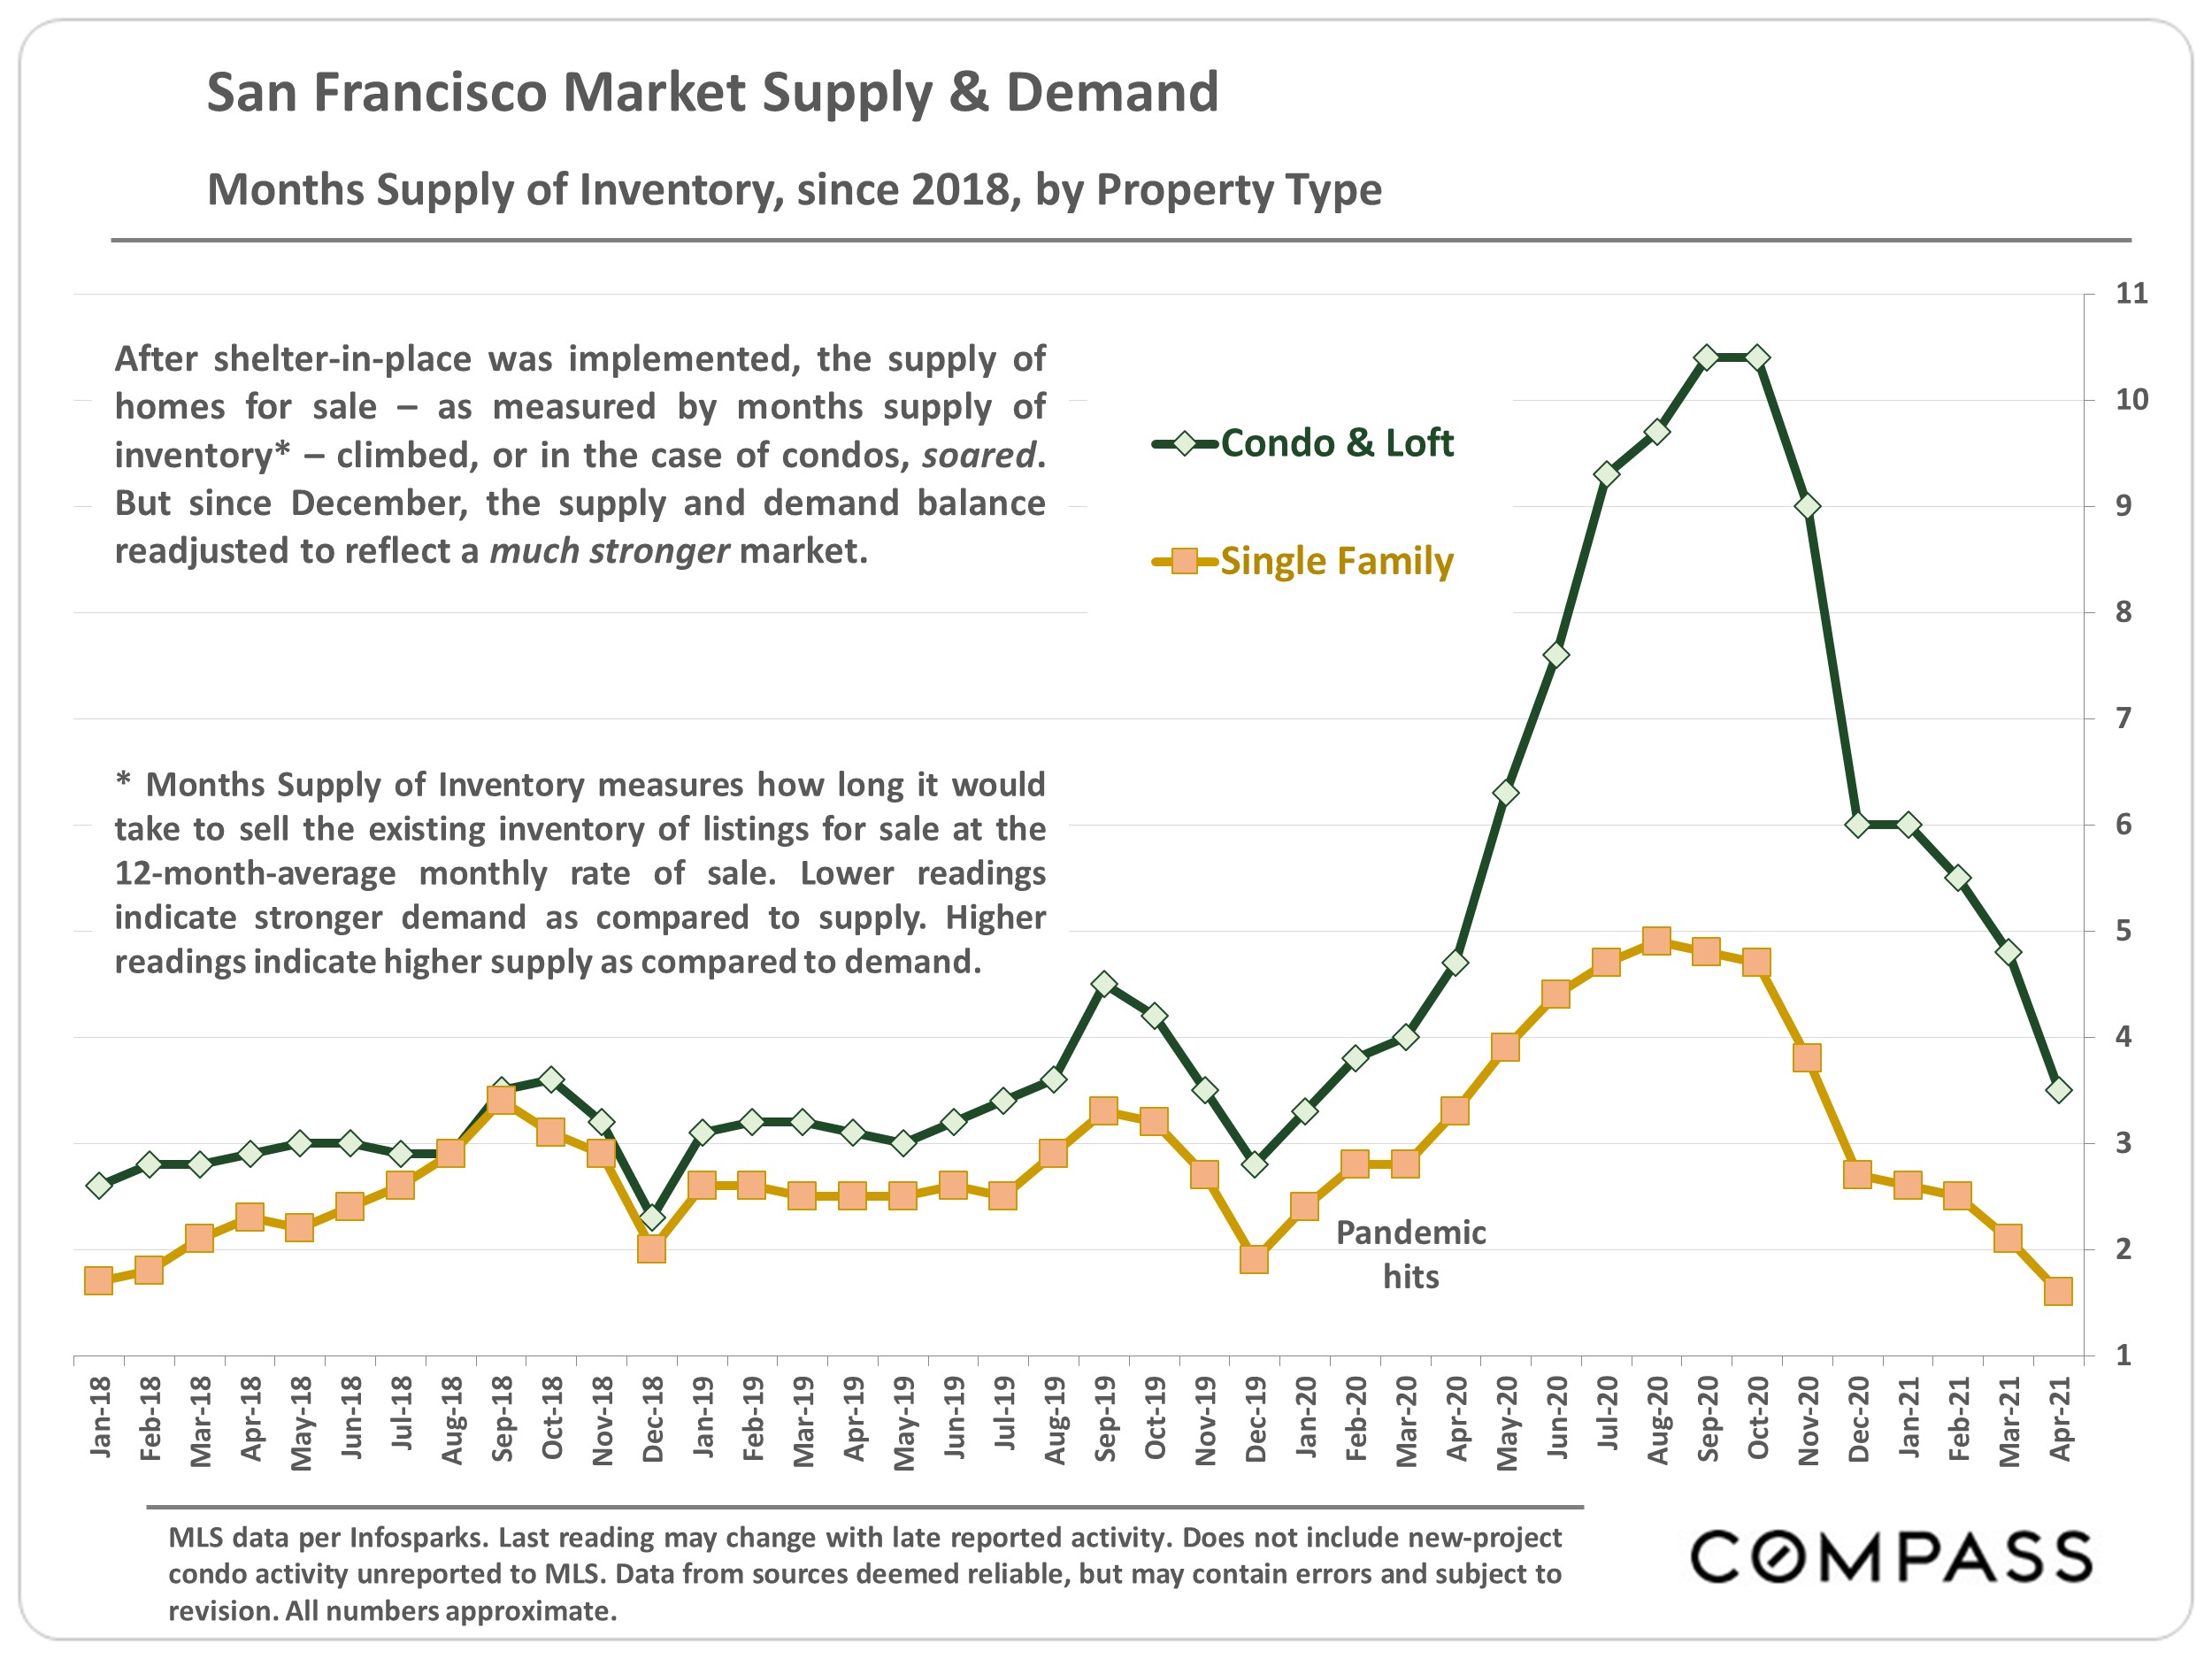 Chart showing the San Francisco Market Supply & Demand, Months supply of Inventory, since 2018, by Property Type